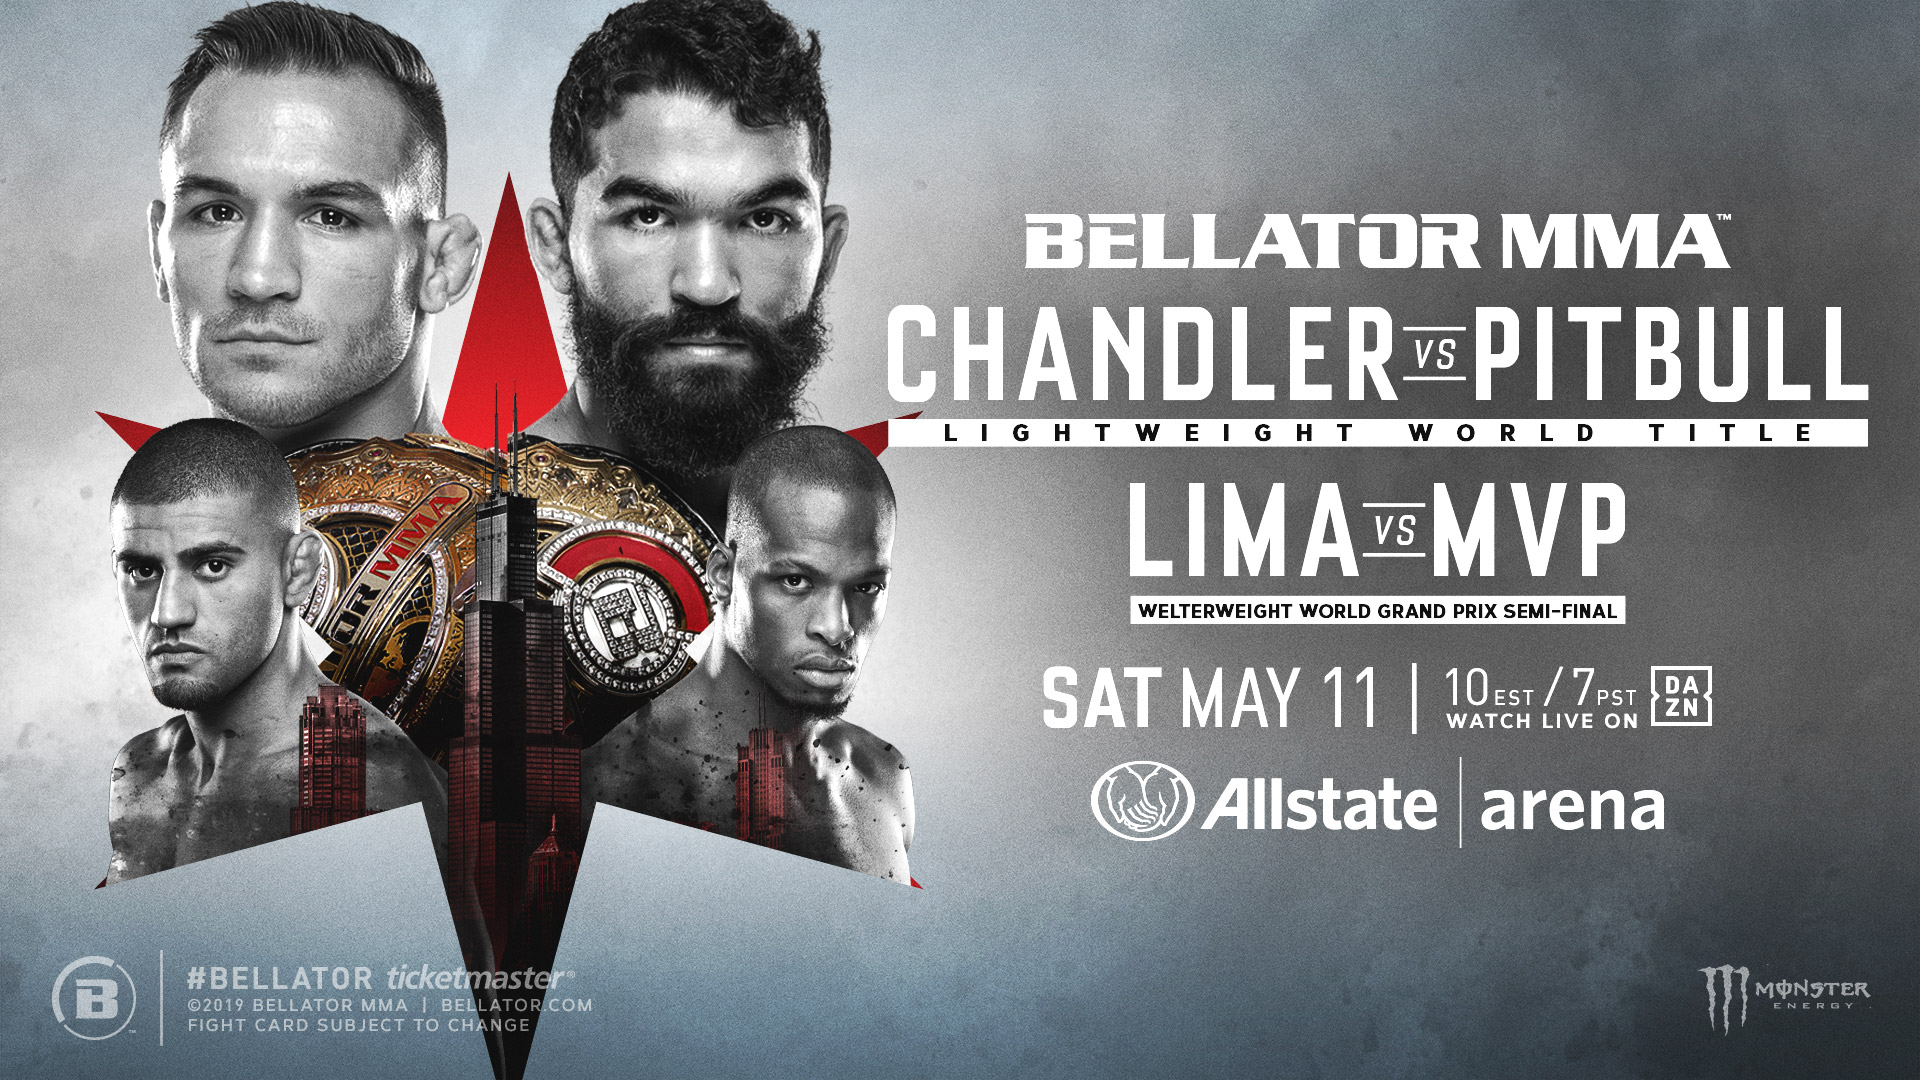 Bellator Returns to Allstate Arena in Chicago on Saturday, May 11